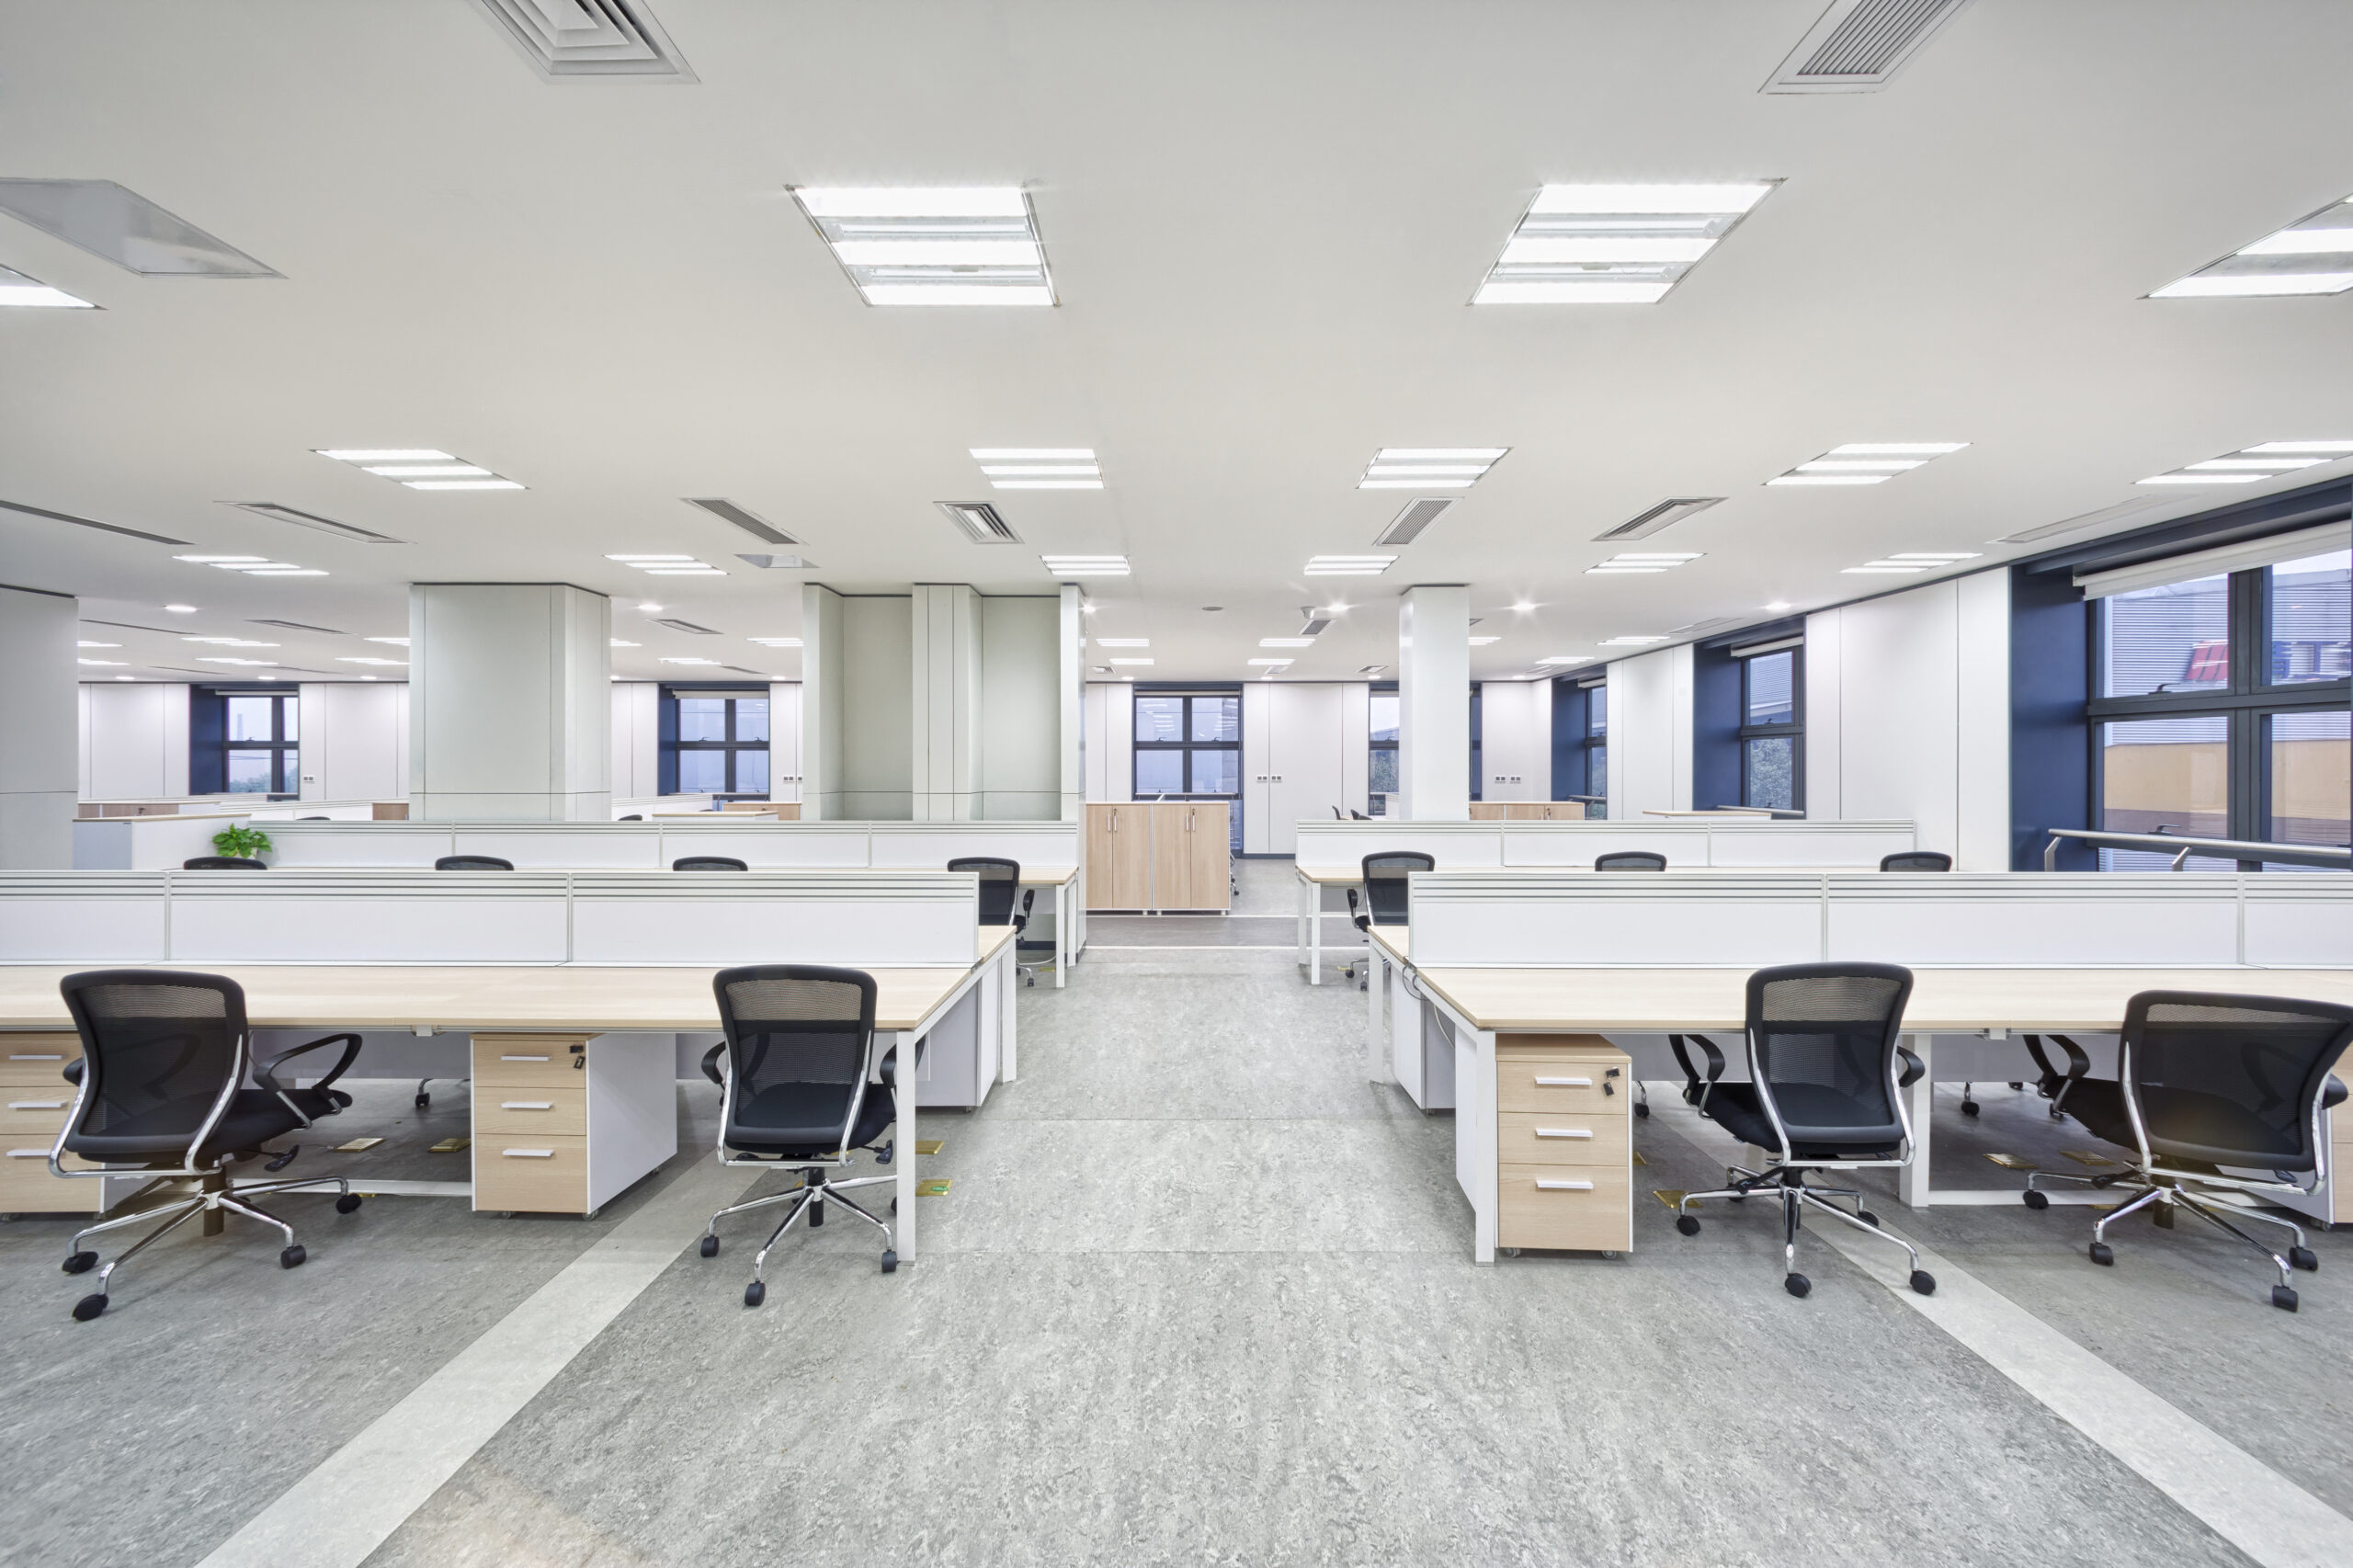 How To Choose The Perfect Flooring For Your Business: Tips From Our Company